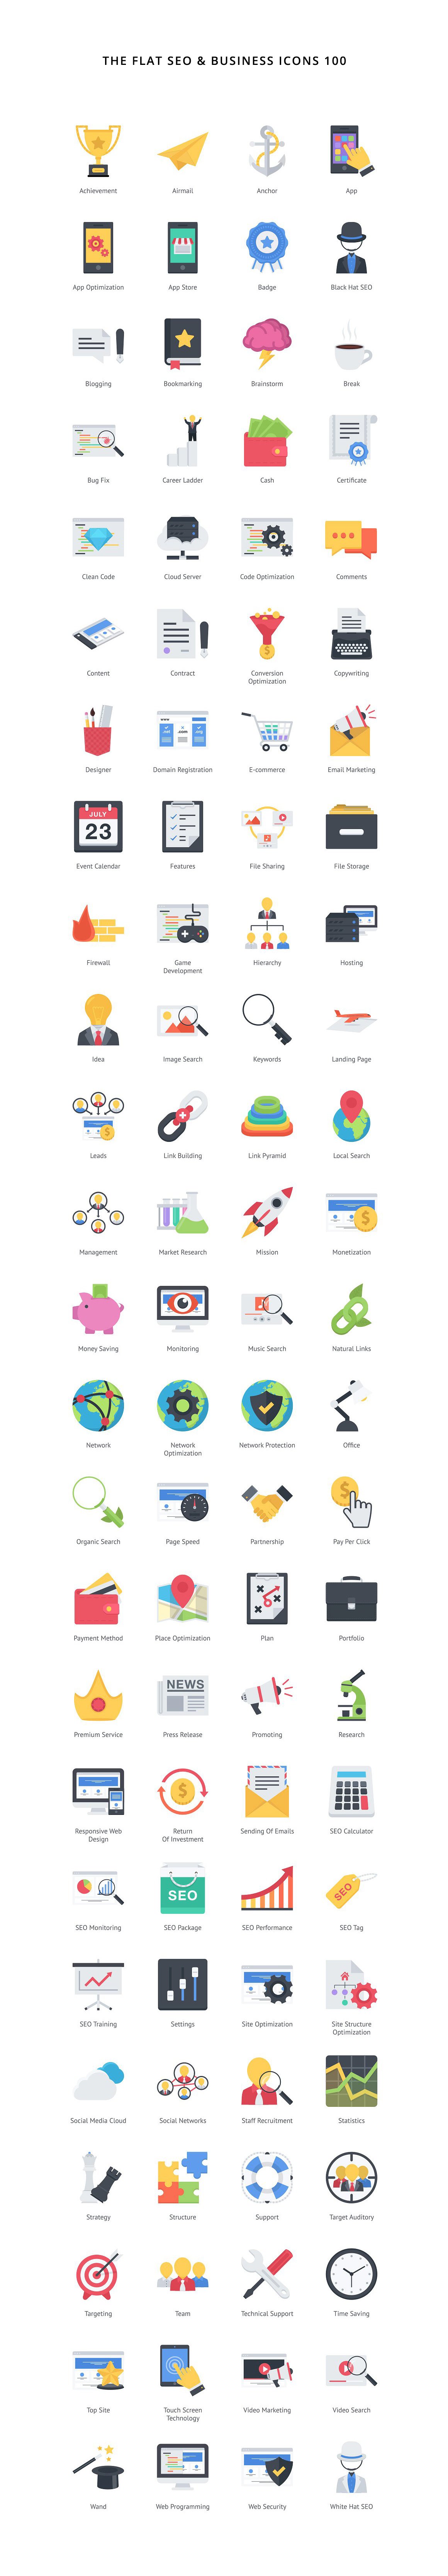 the flat seo business icons 100 72